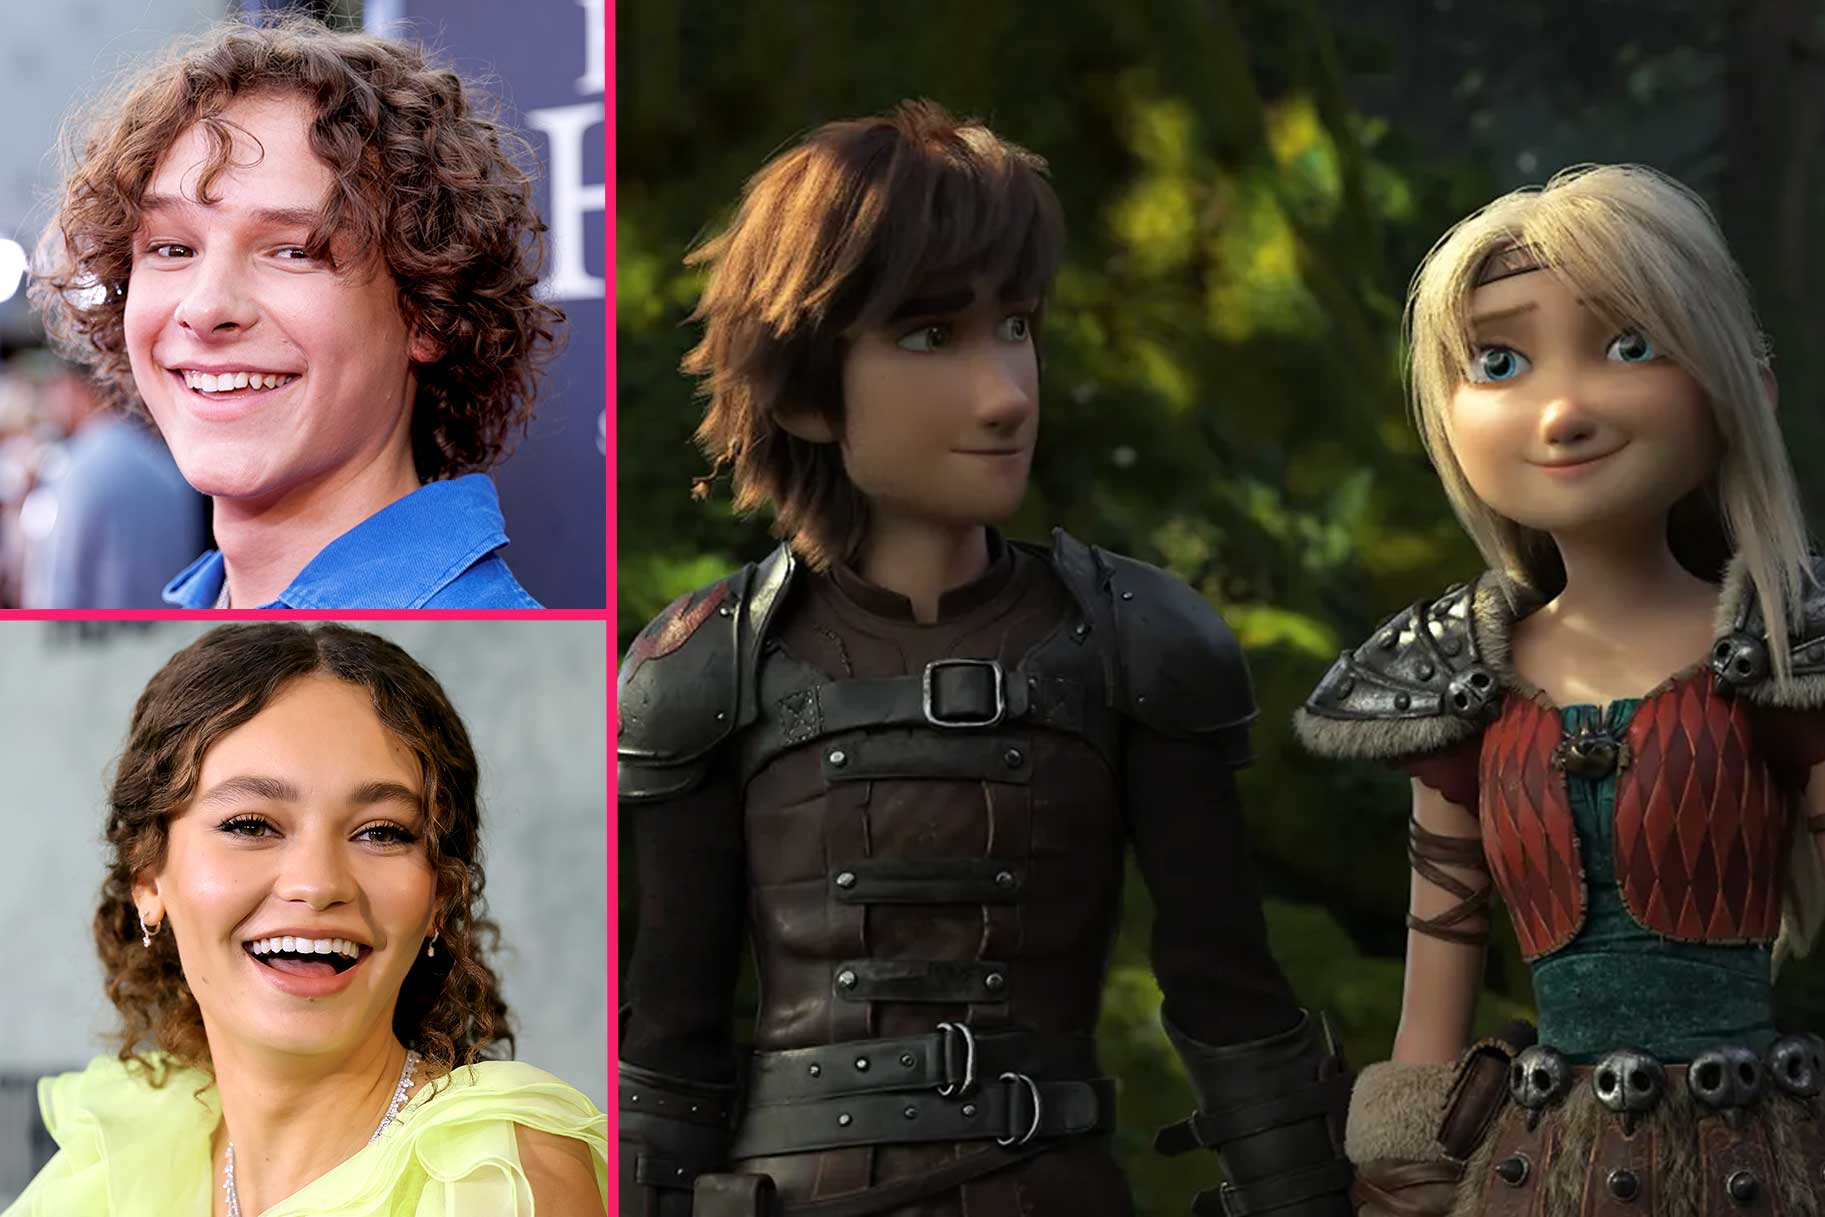 How to Train Your Dragon Live-Action Movie Casts Hiccup and Astrid